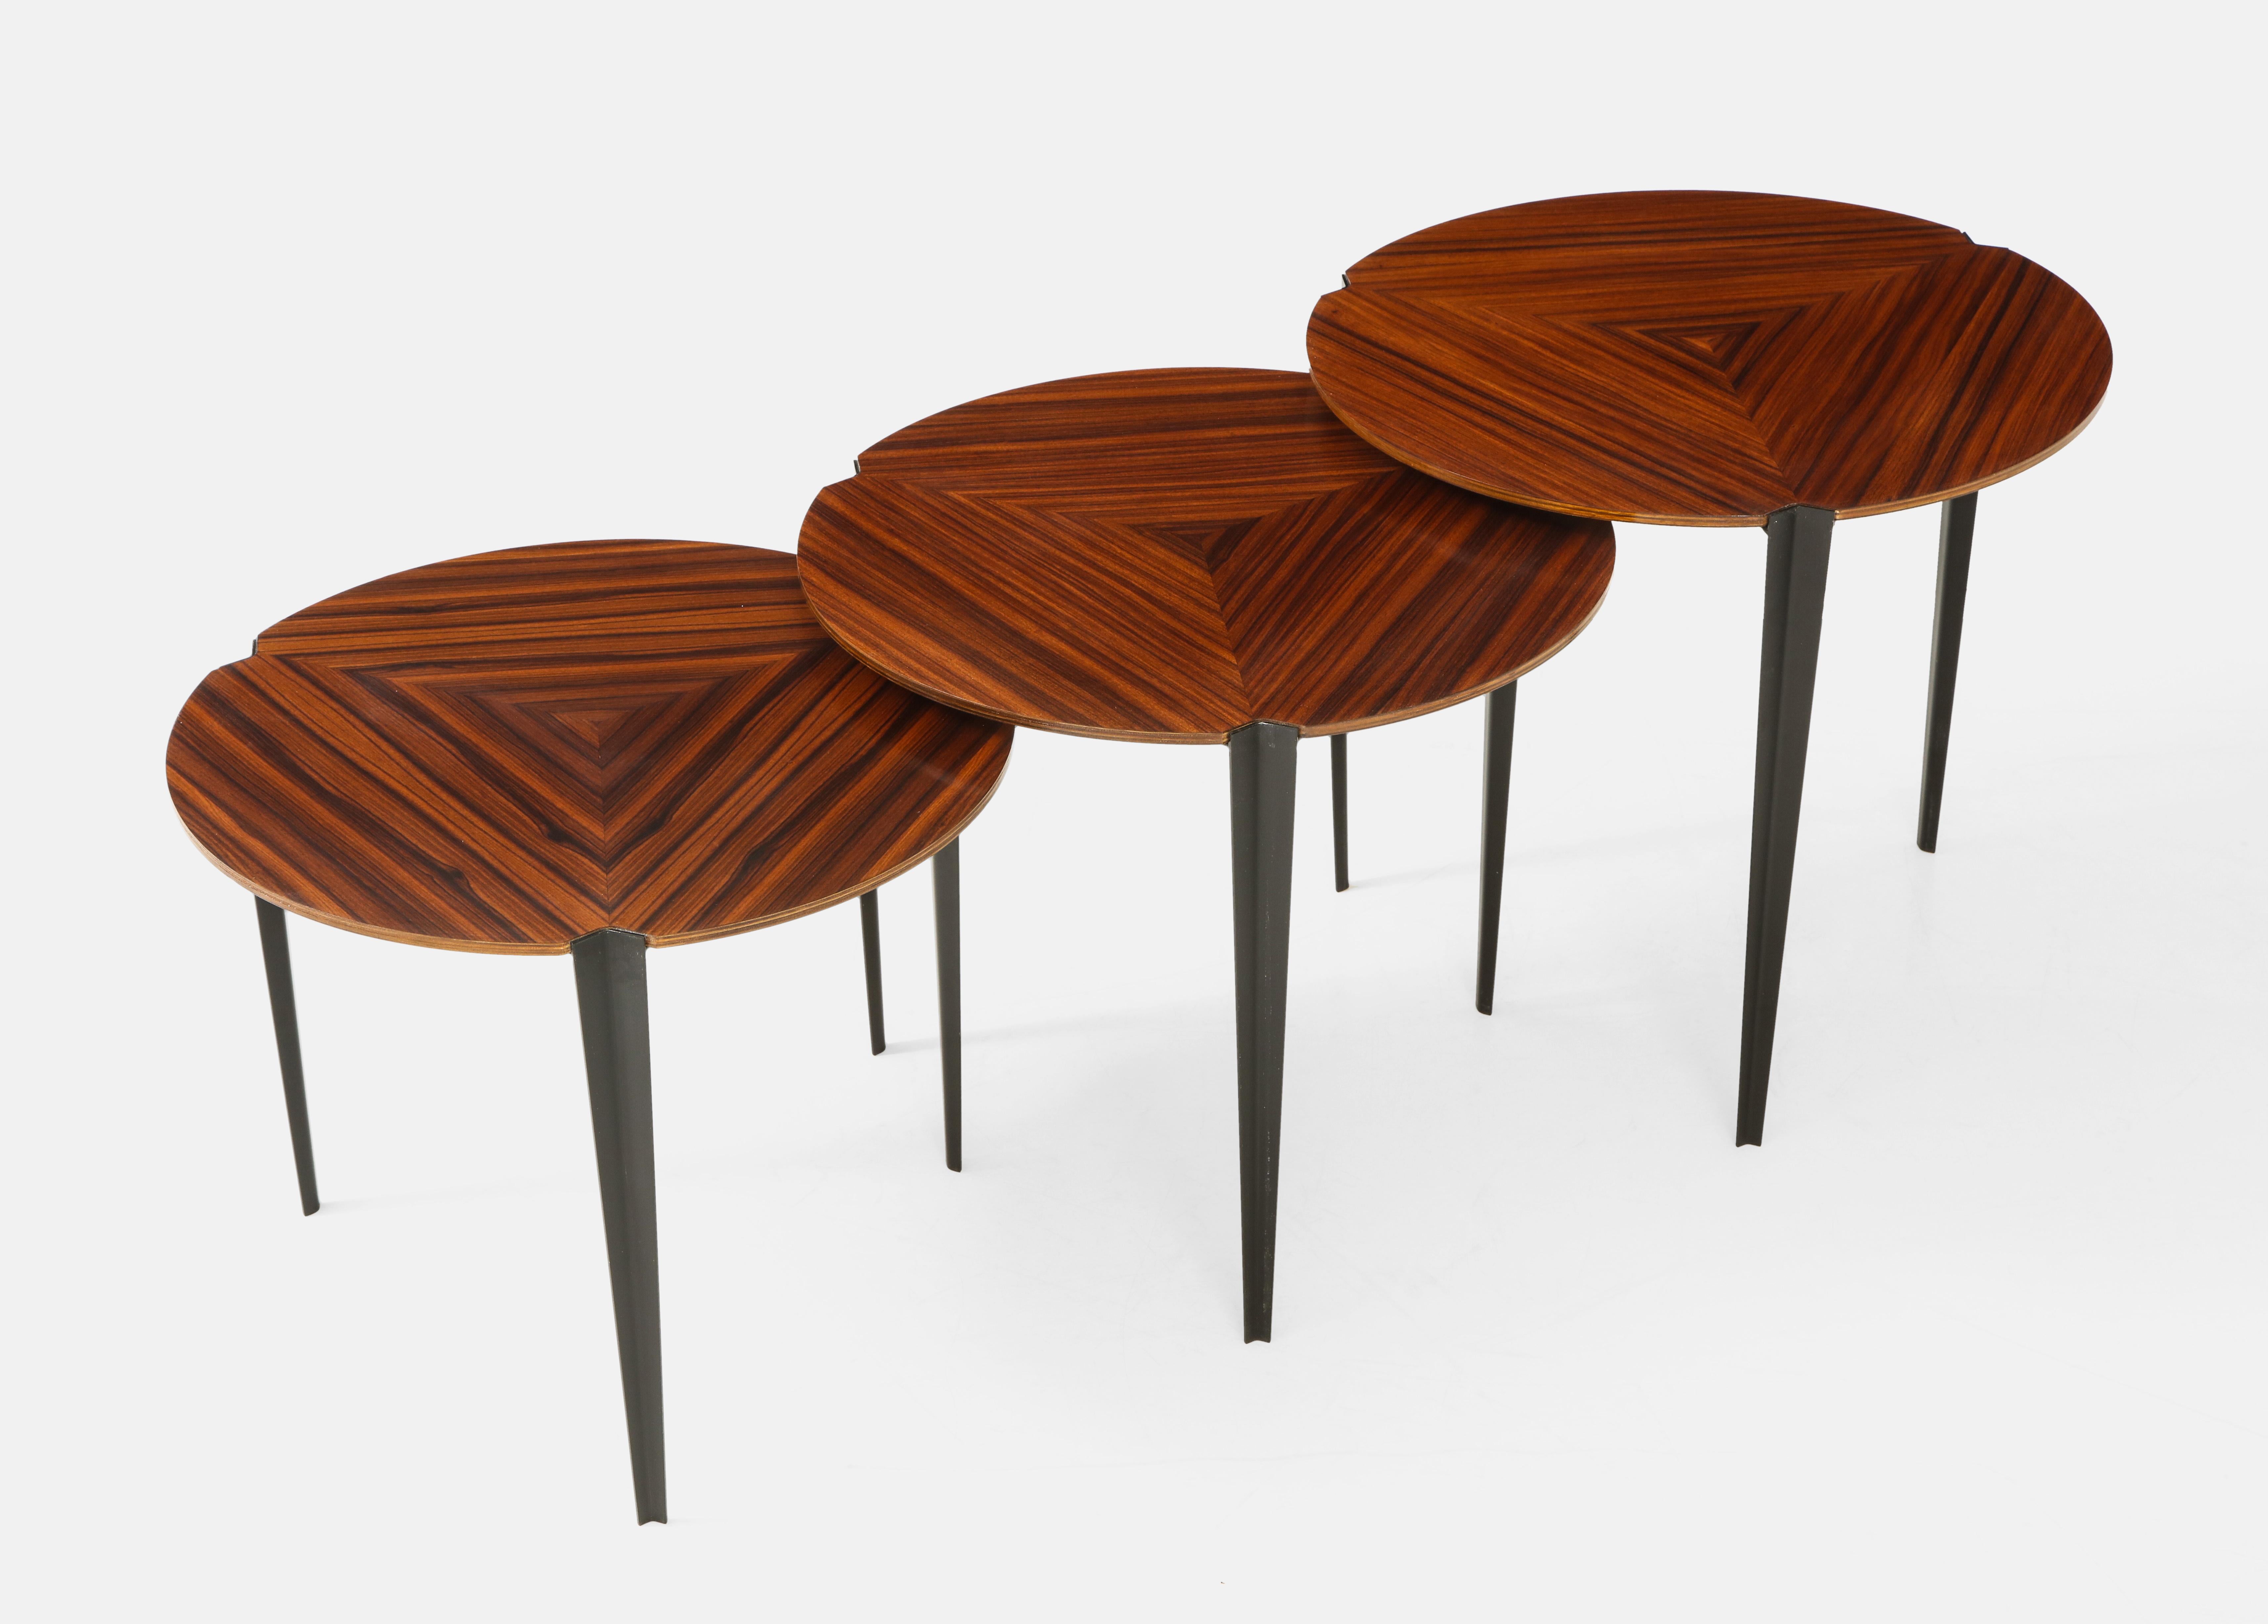 Osvaldo Borsani for Tecno set of 3 modernist nesting tables with rosewood veneer tops on three black enamel tapering metal legs, Italy, circa 1957. The table tops consist of three stark grained wood veneer pieces assembled to create a graphic